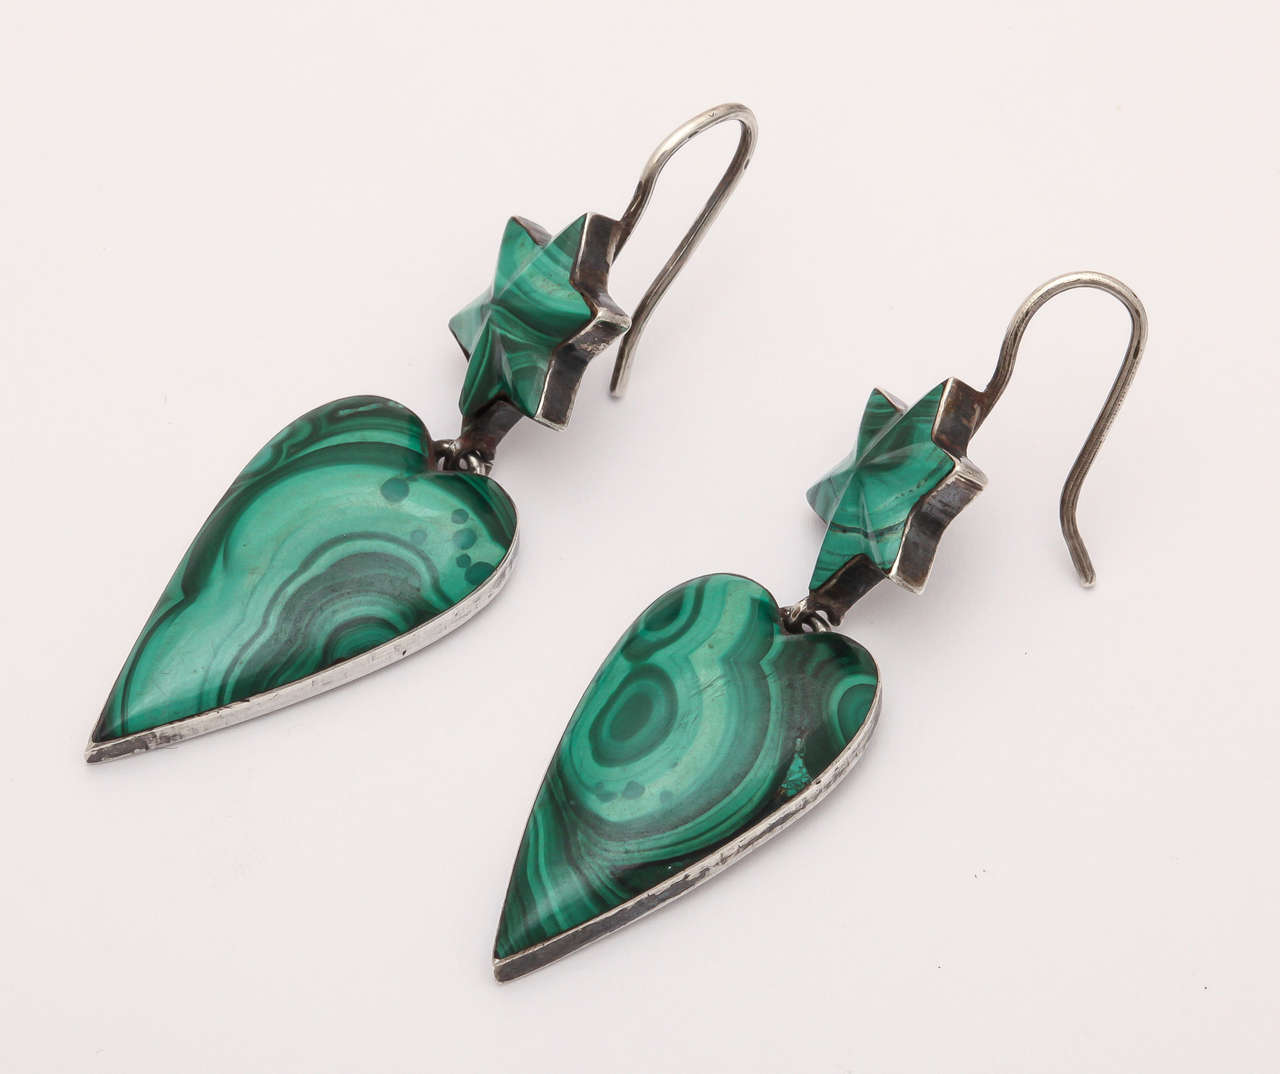 Perpetually wearable earrings fashioned in sterling silver and beautiful malachite stones with its undulating swirls of color.  This is a pair I have seen only now, this once, in 30 years. Stars at the top. Elongated hearts at the bottom. The